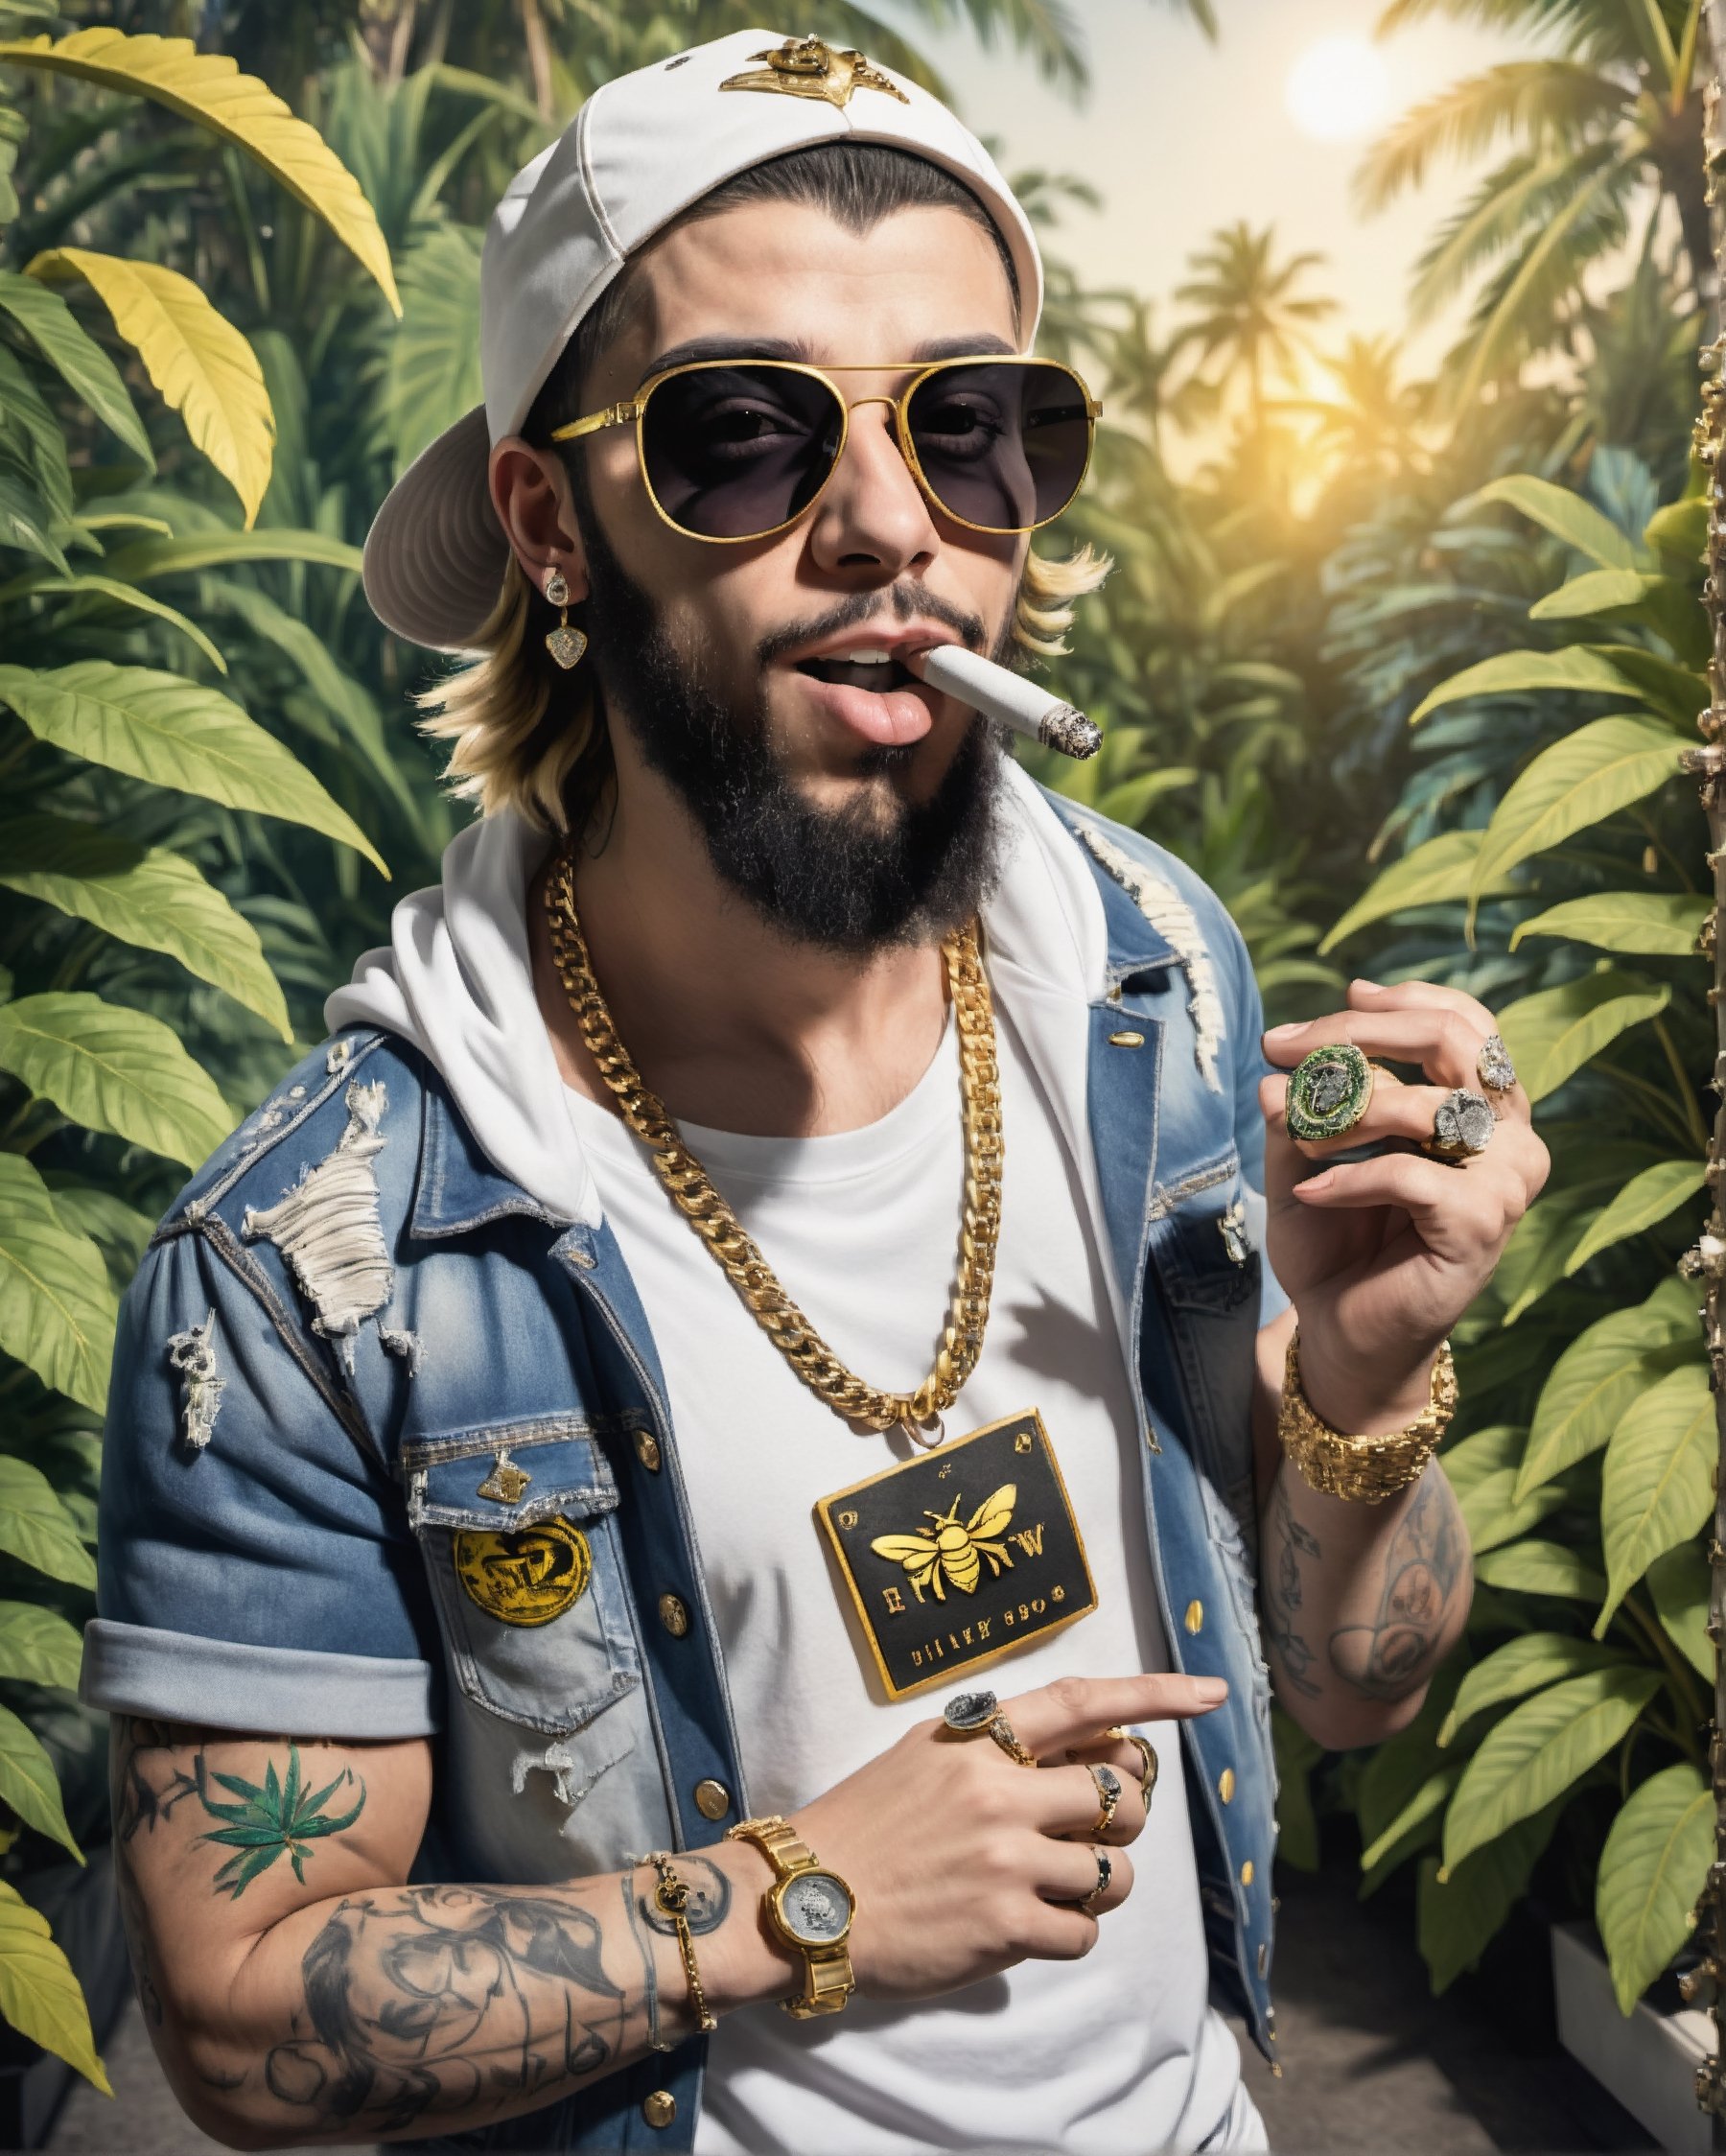 Detailed portrait of a beardless young man, cover photo smoking marijuana and wearing sunglasses. white gold ring a bumblebee, wearing a white t-shirt and a denim jacket with a cap on the back, a chain with diamonds, smoking marijuana. full piece tattoos, a gold tooth

In the background are two security guards dressed in black counting money.

marijuana garden background. tag on clothing